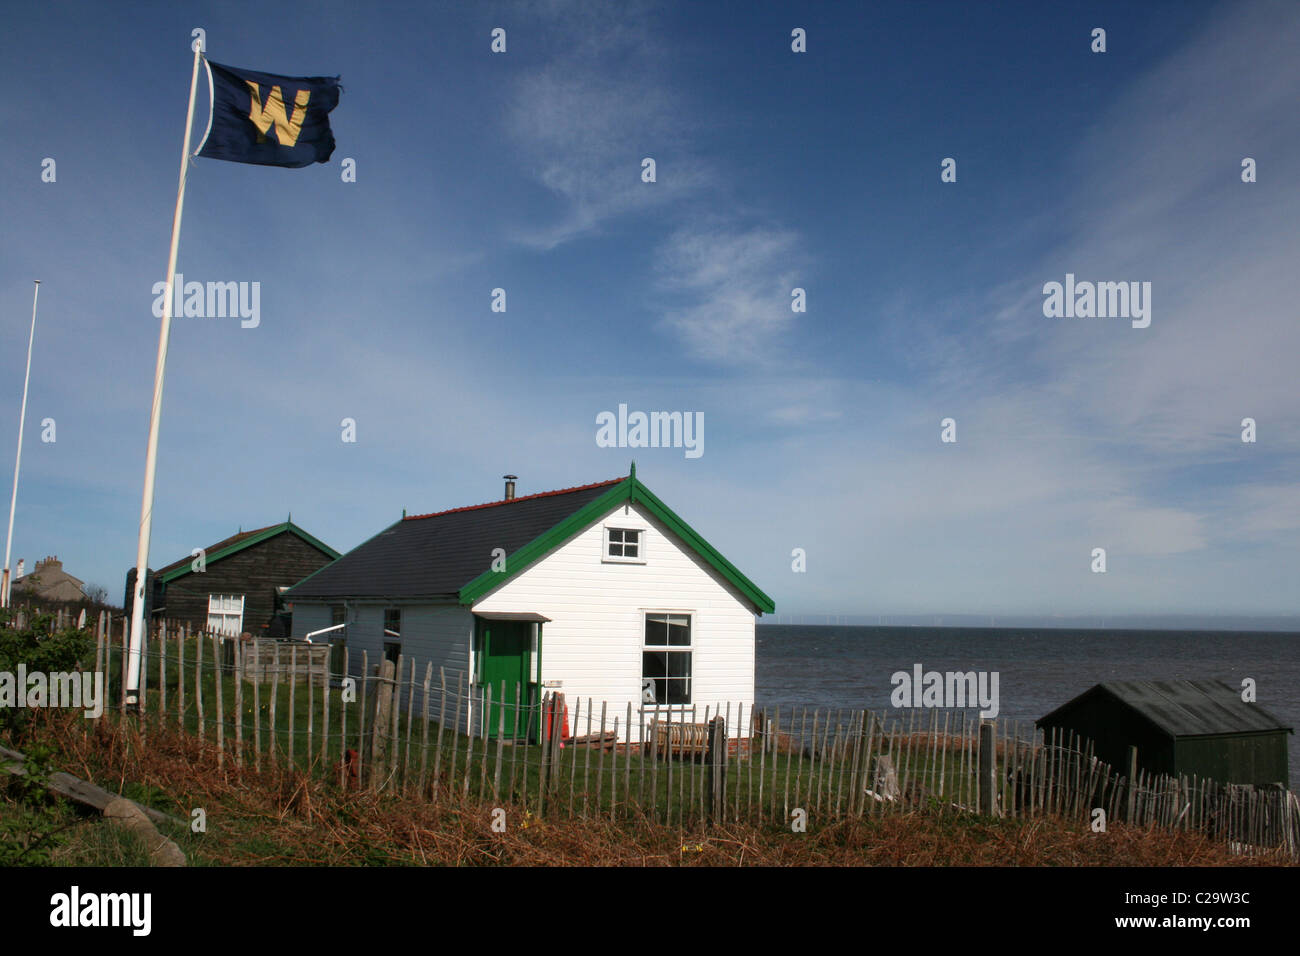 Wooden Houses On Hilbre Island, Wirral, UK Stock Photo